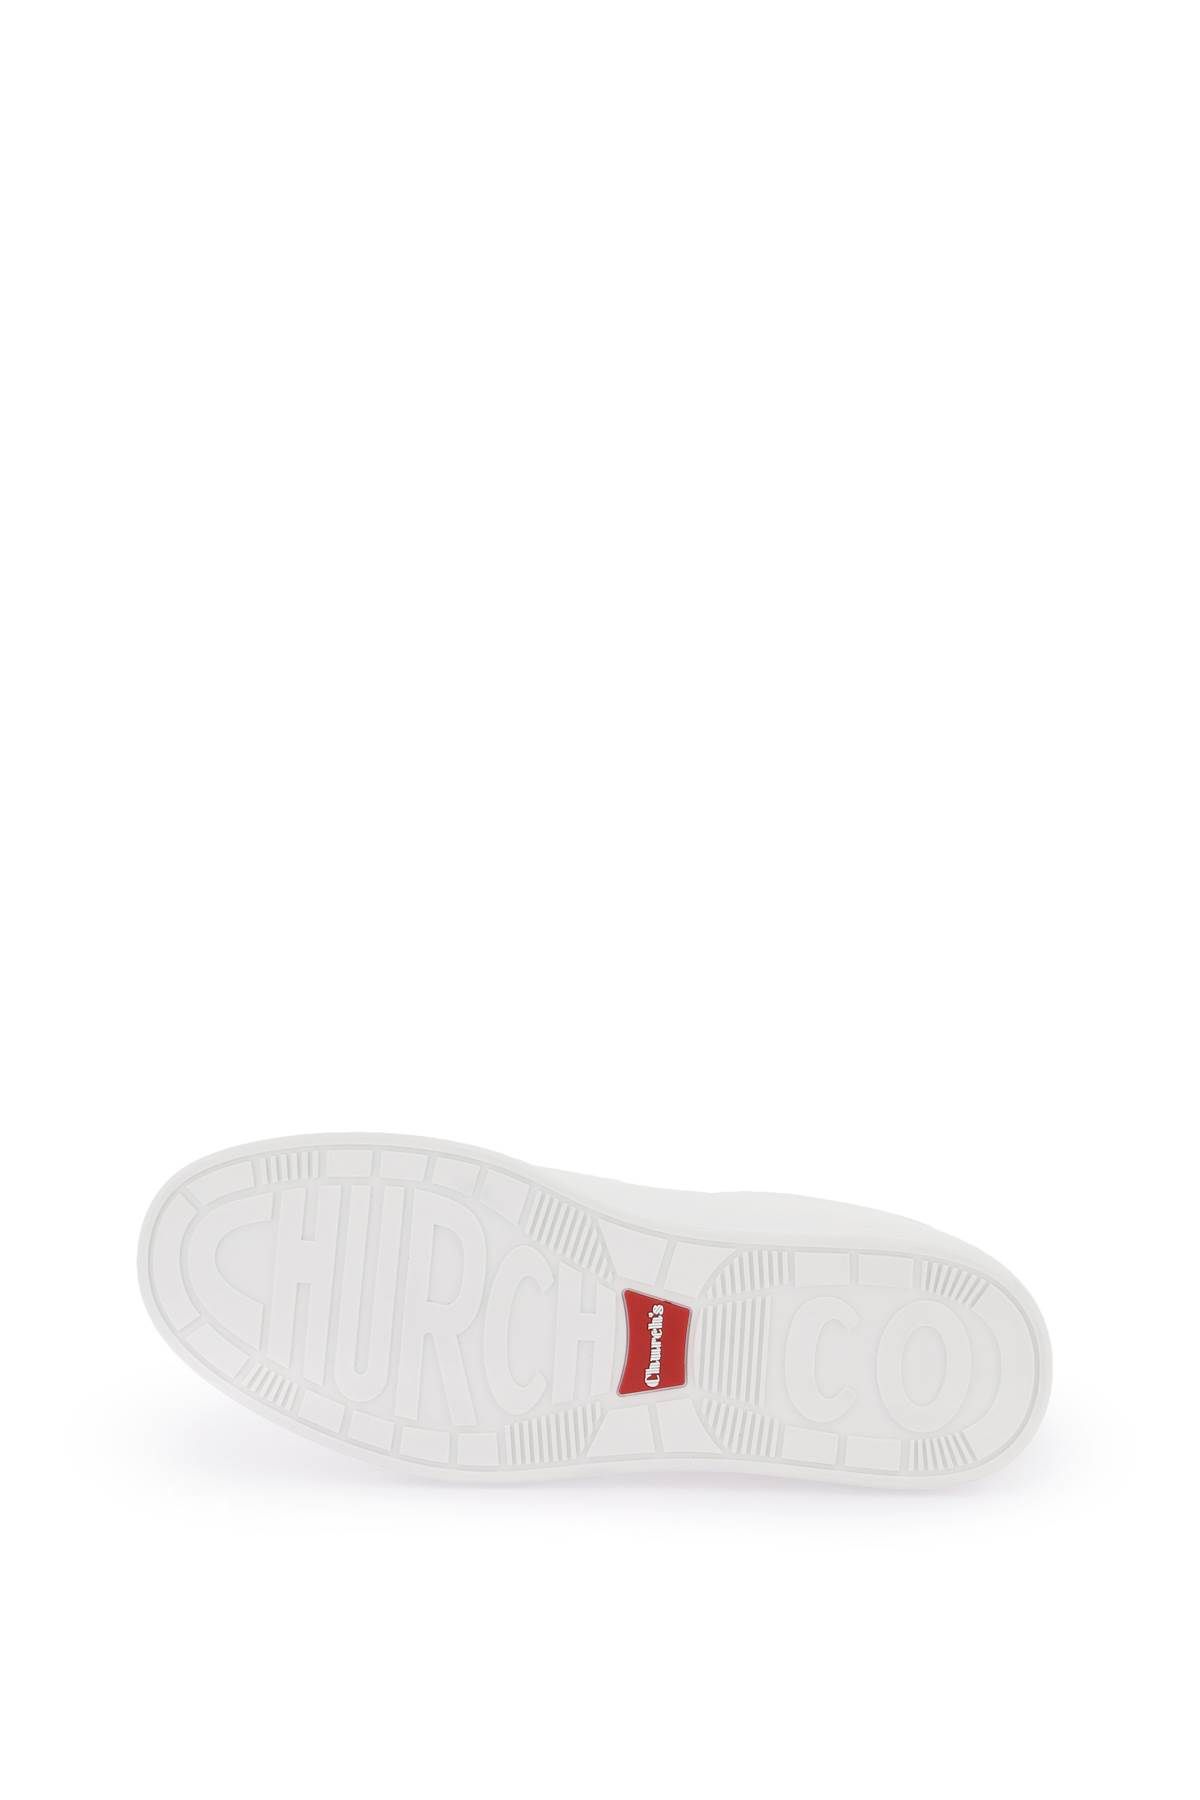 Shop Church's Ludlow Sneakers In White